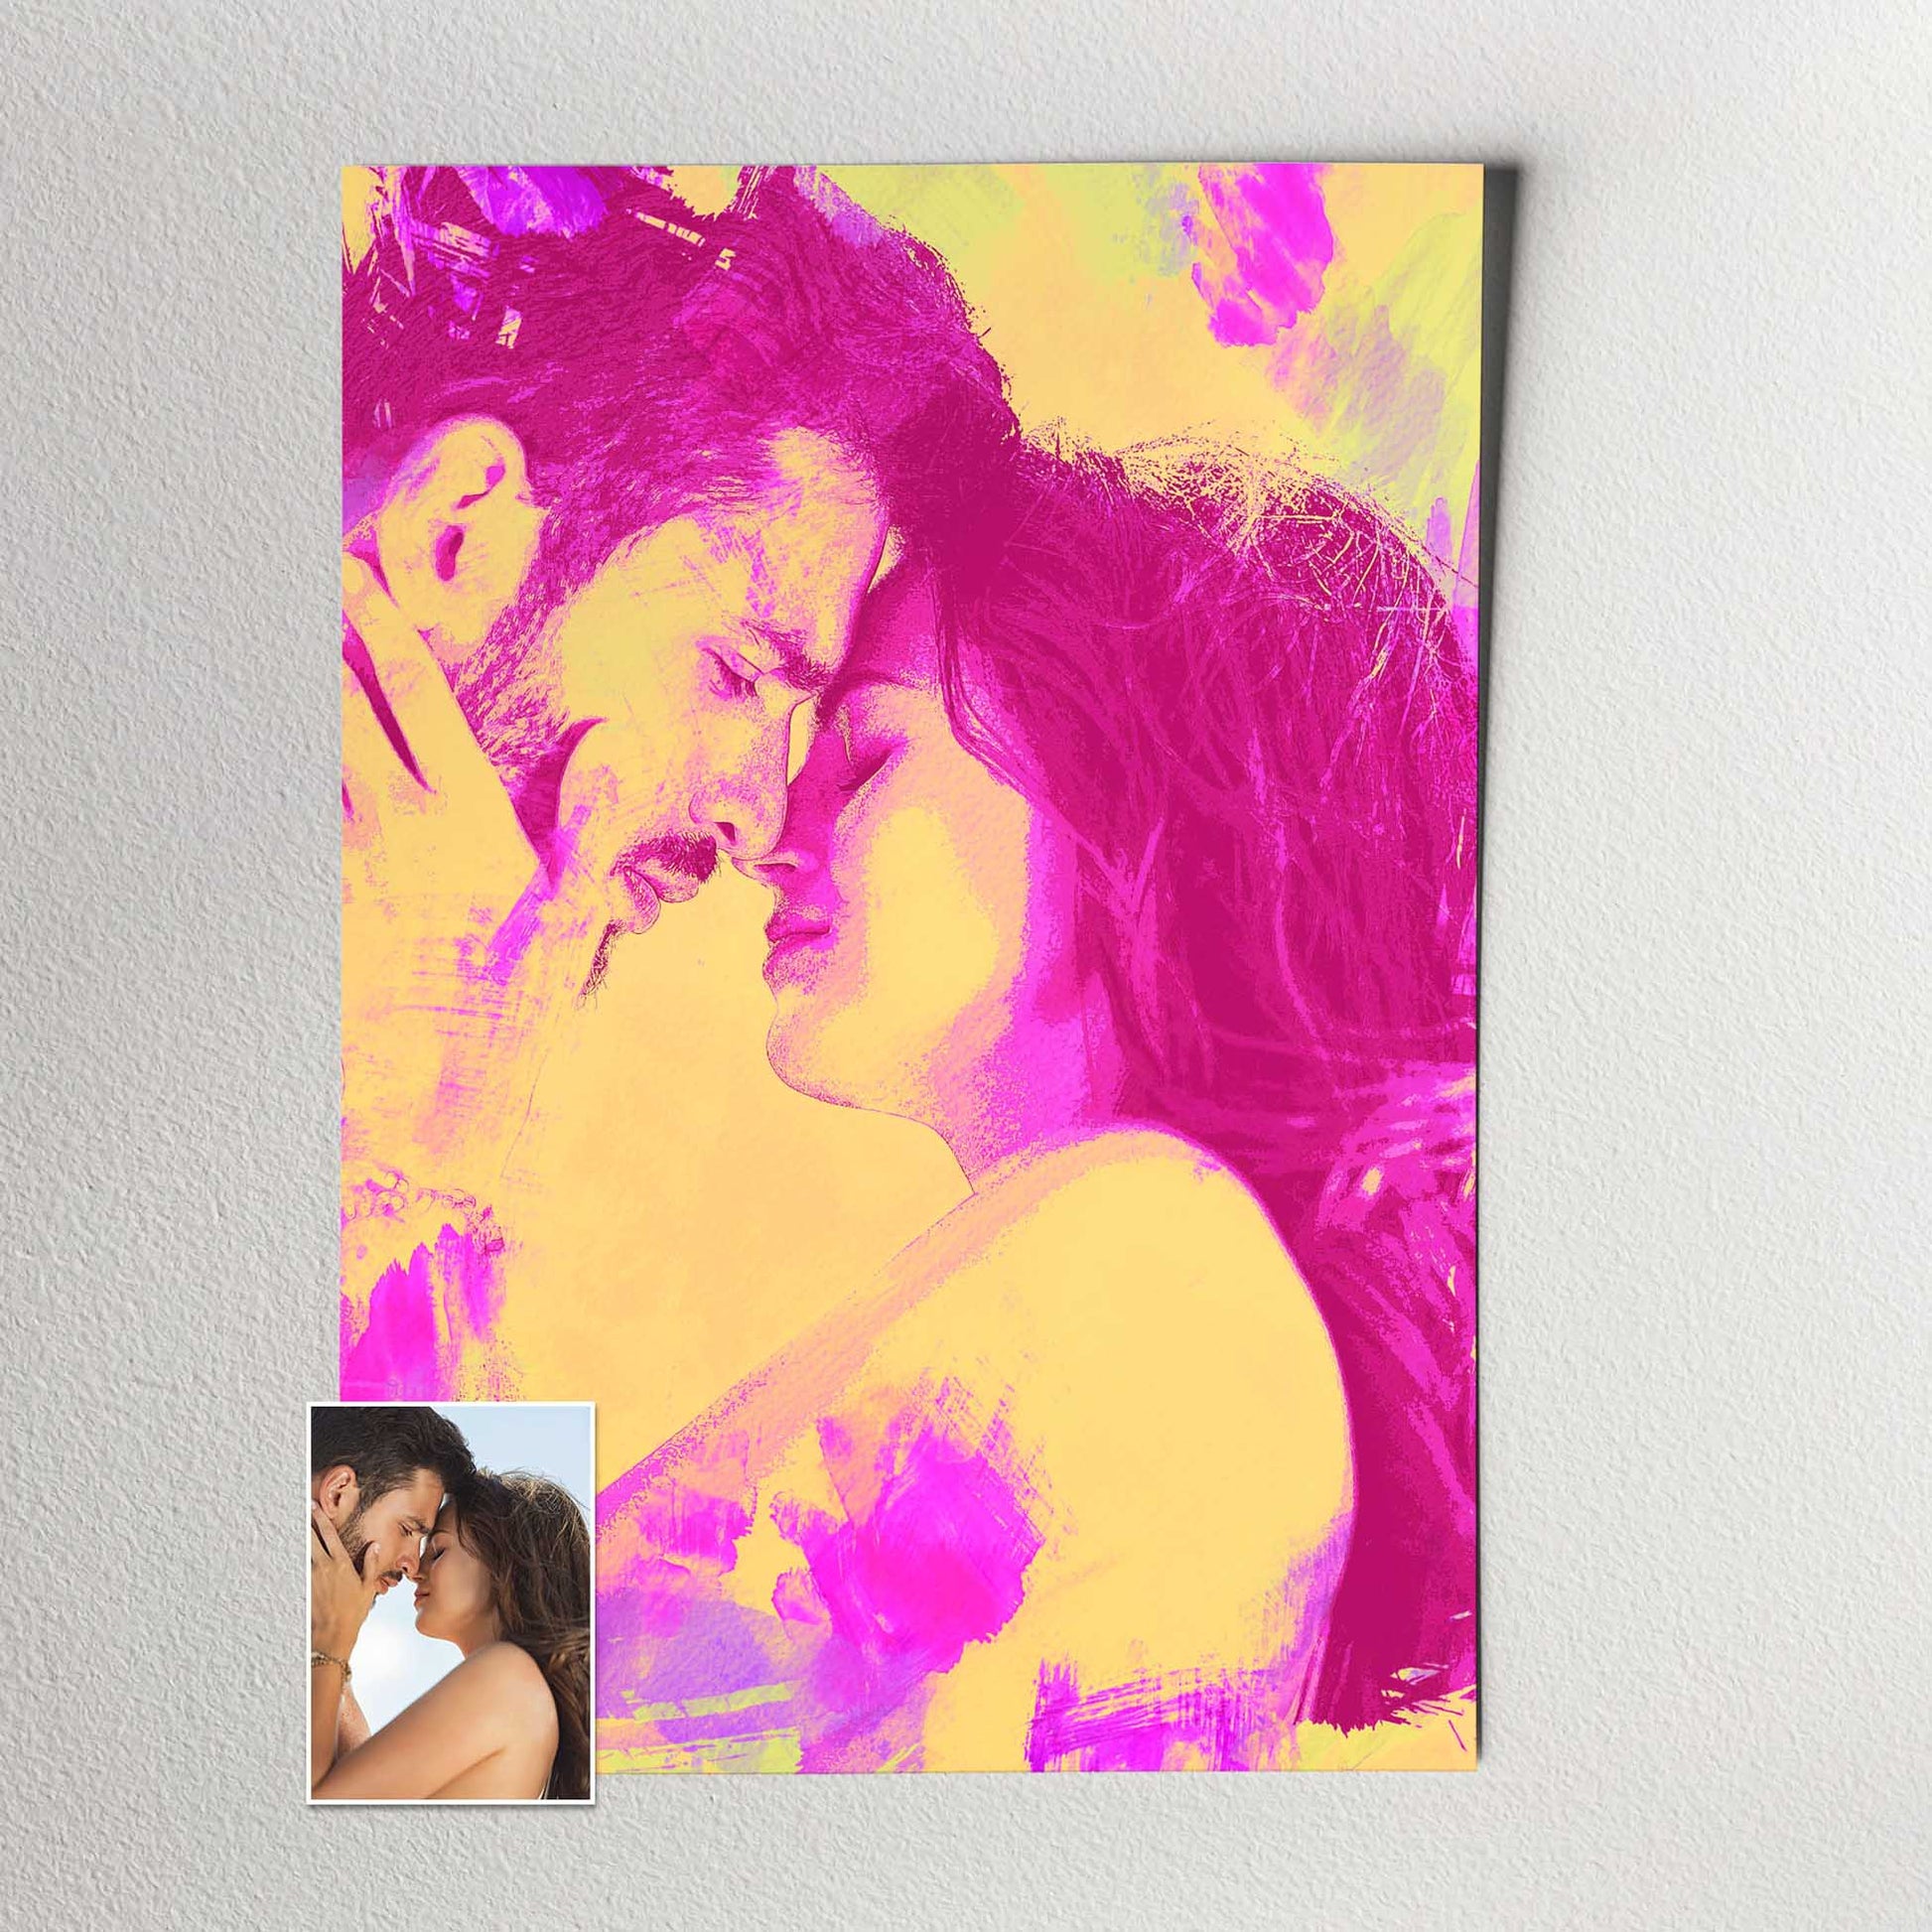 Embrace the creativity of our Personalised Pink & Yellow Watercolor Print. Crafted from your photo using a realistic traditional watercolor style, this unique artwork showcases the beauty of pink and yellow hues